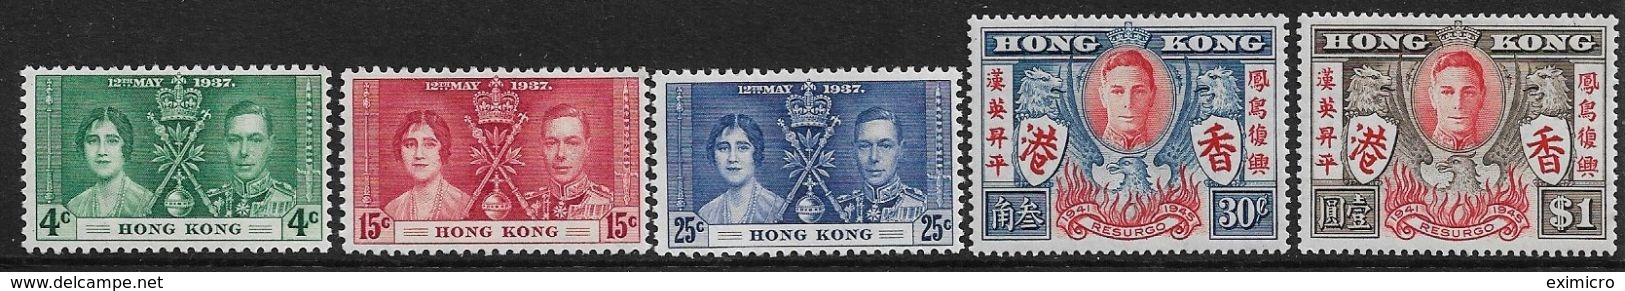 HONG KONG 1937 CORONATION AND 1946 VICTORY SETS MOUNTED MINT Cat £26 - Unused Stamps